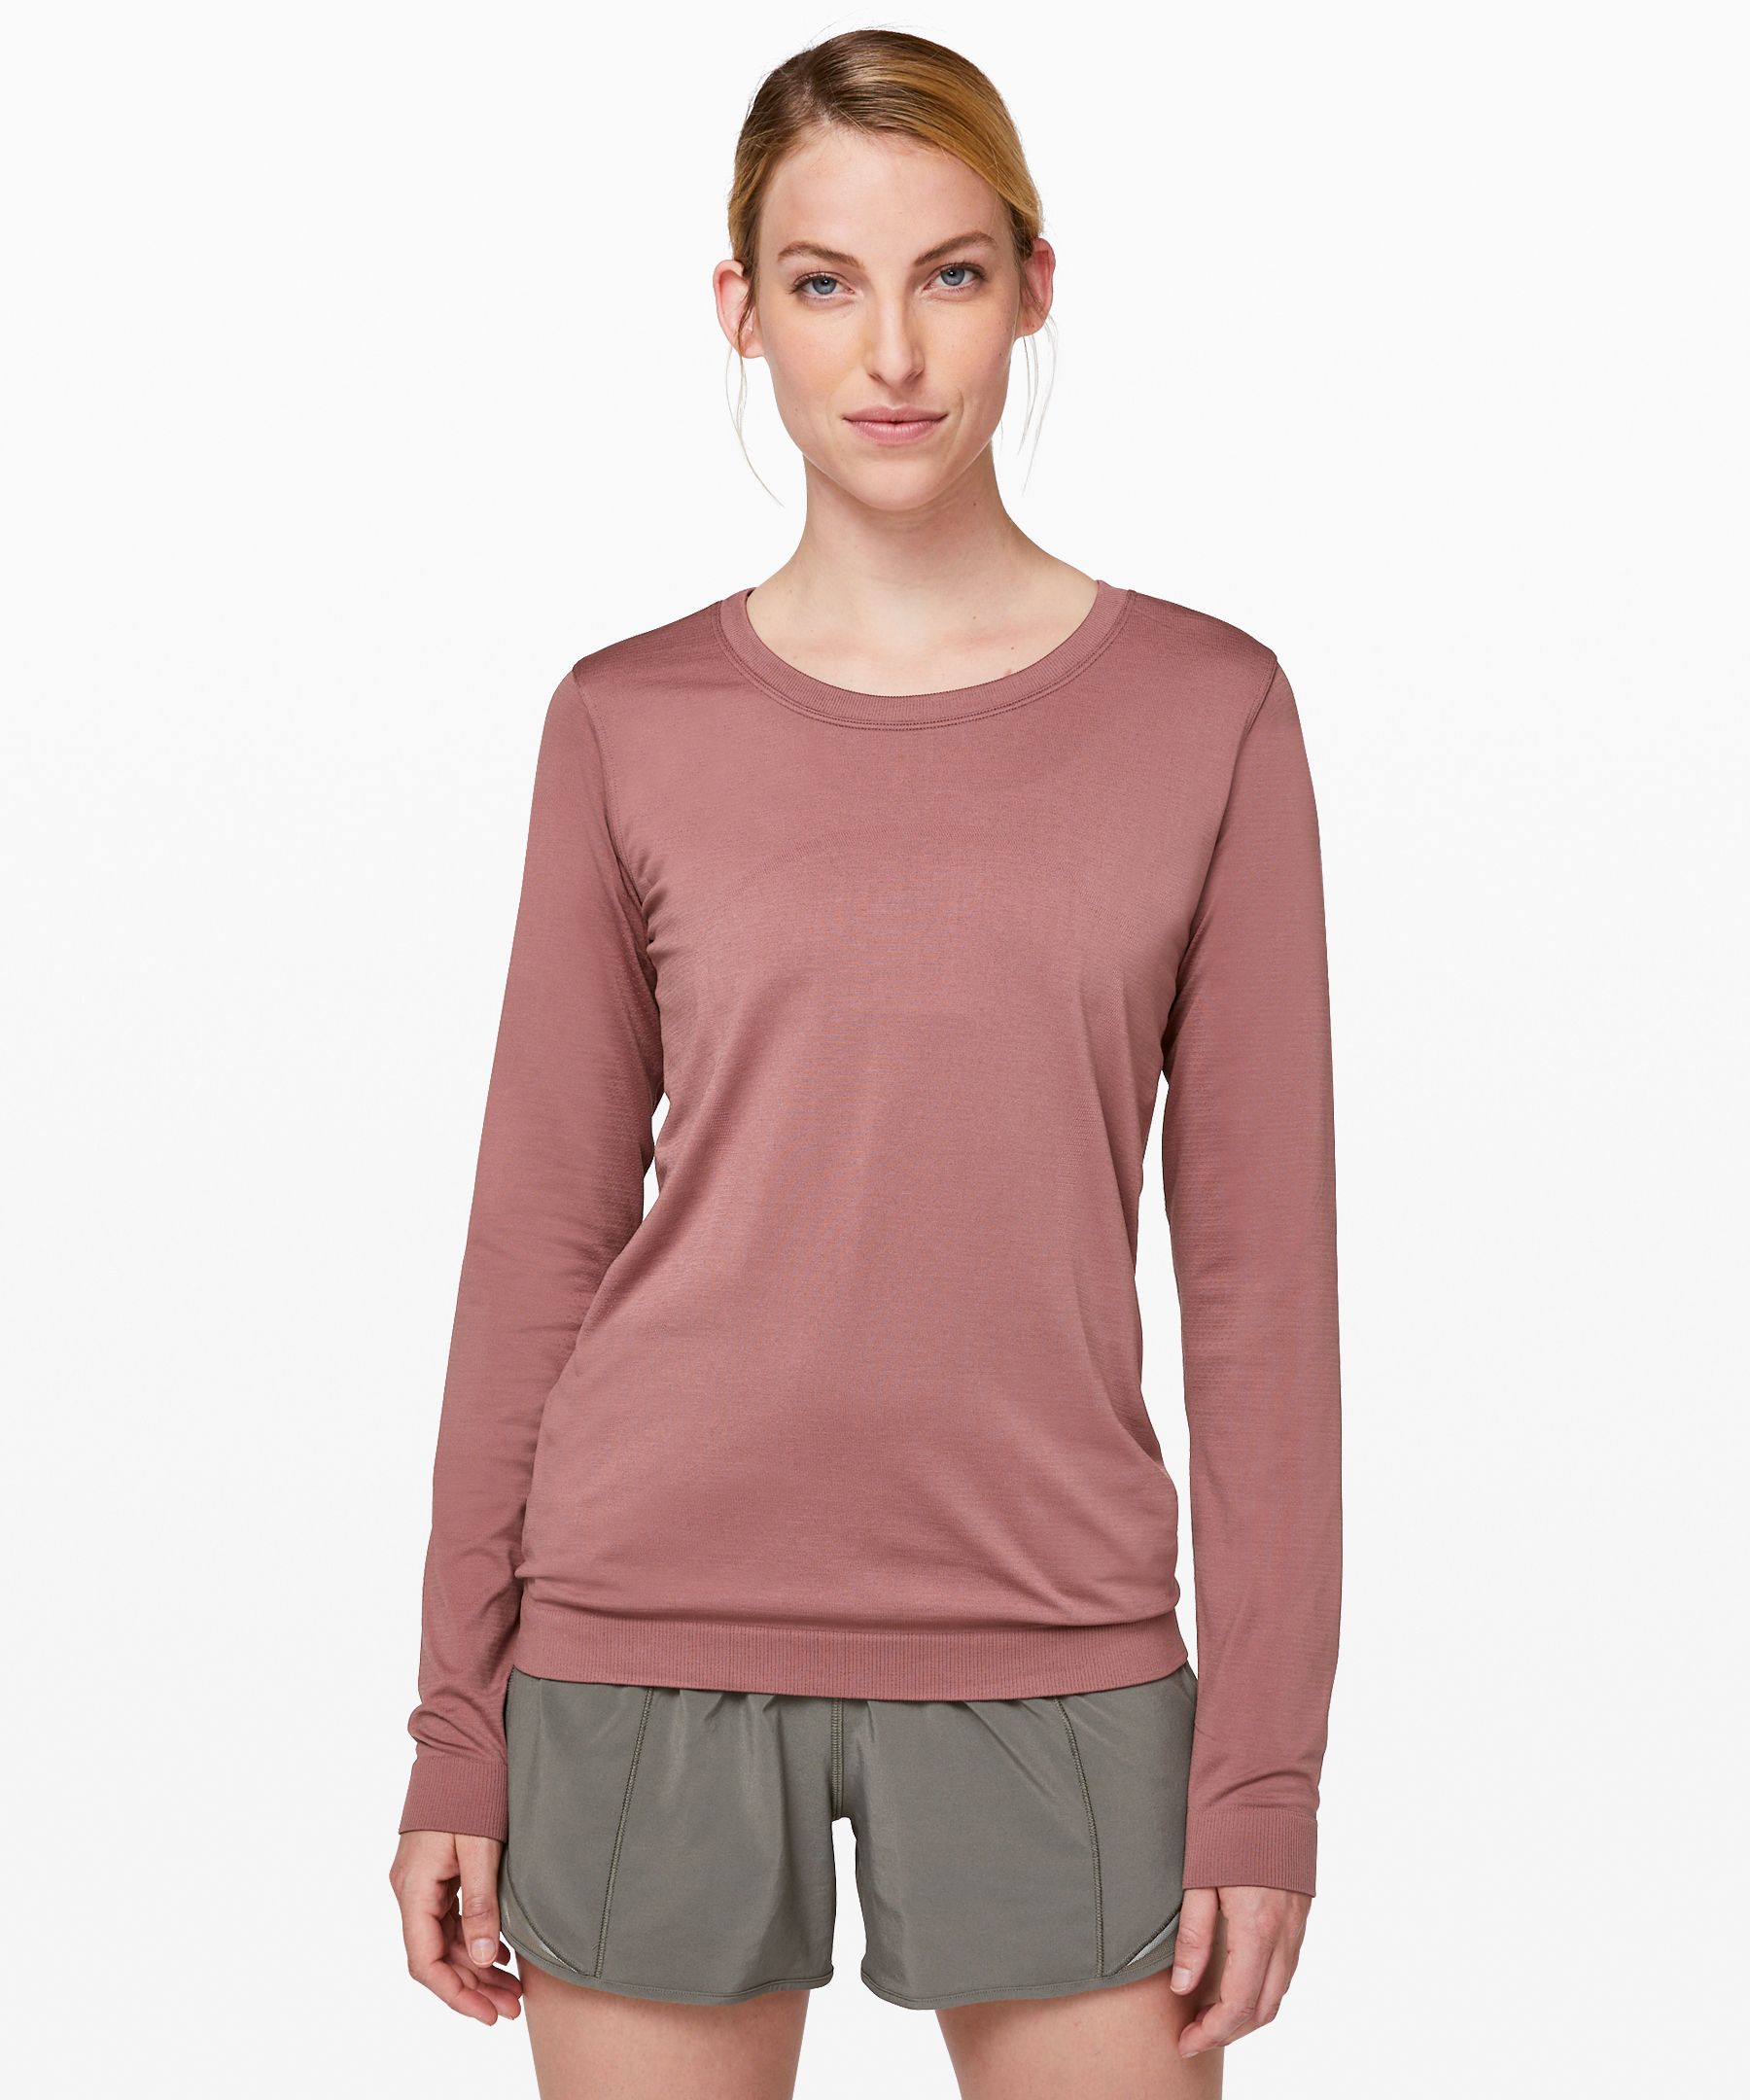 Lululemon Swiftly Relaxed Long Sleeve In Red Dust/red Dust